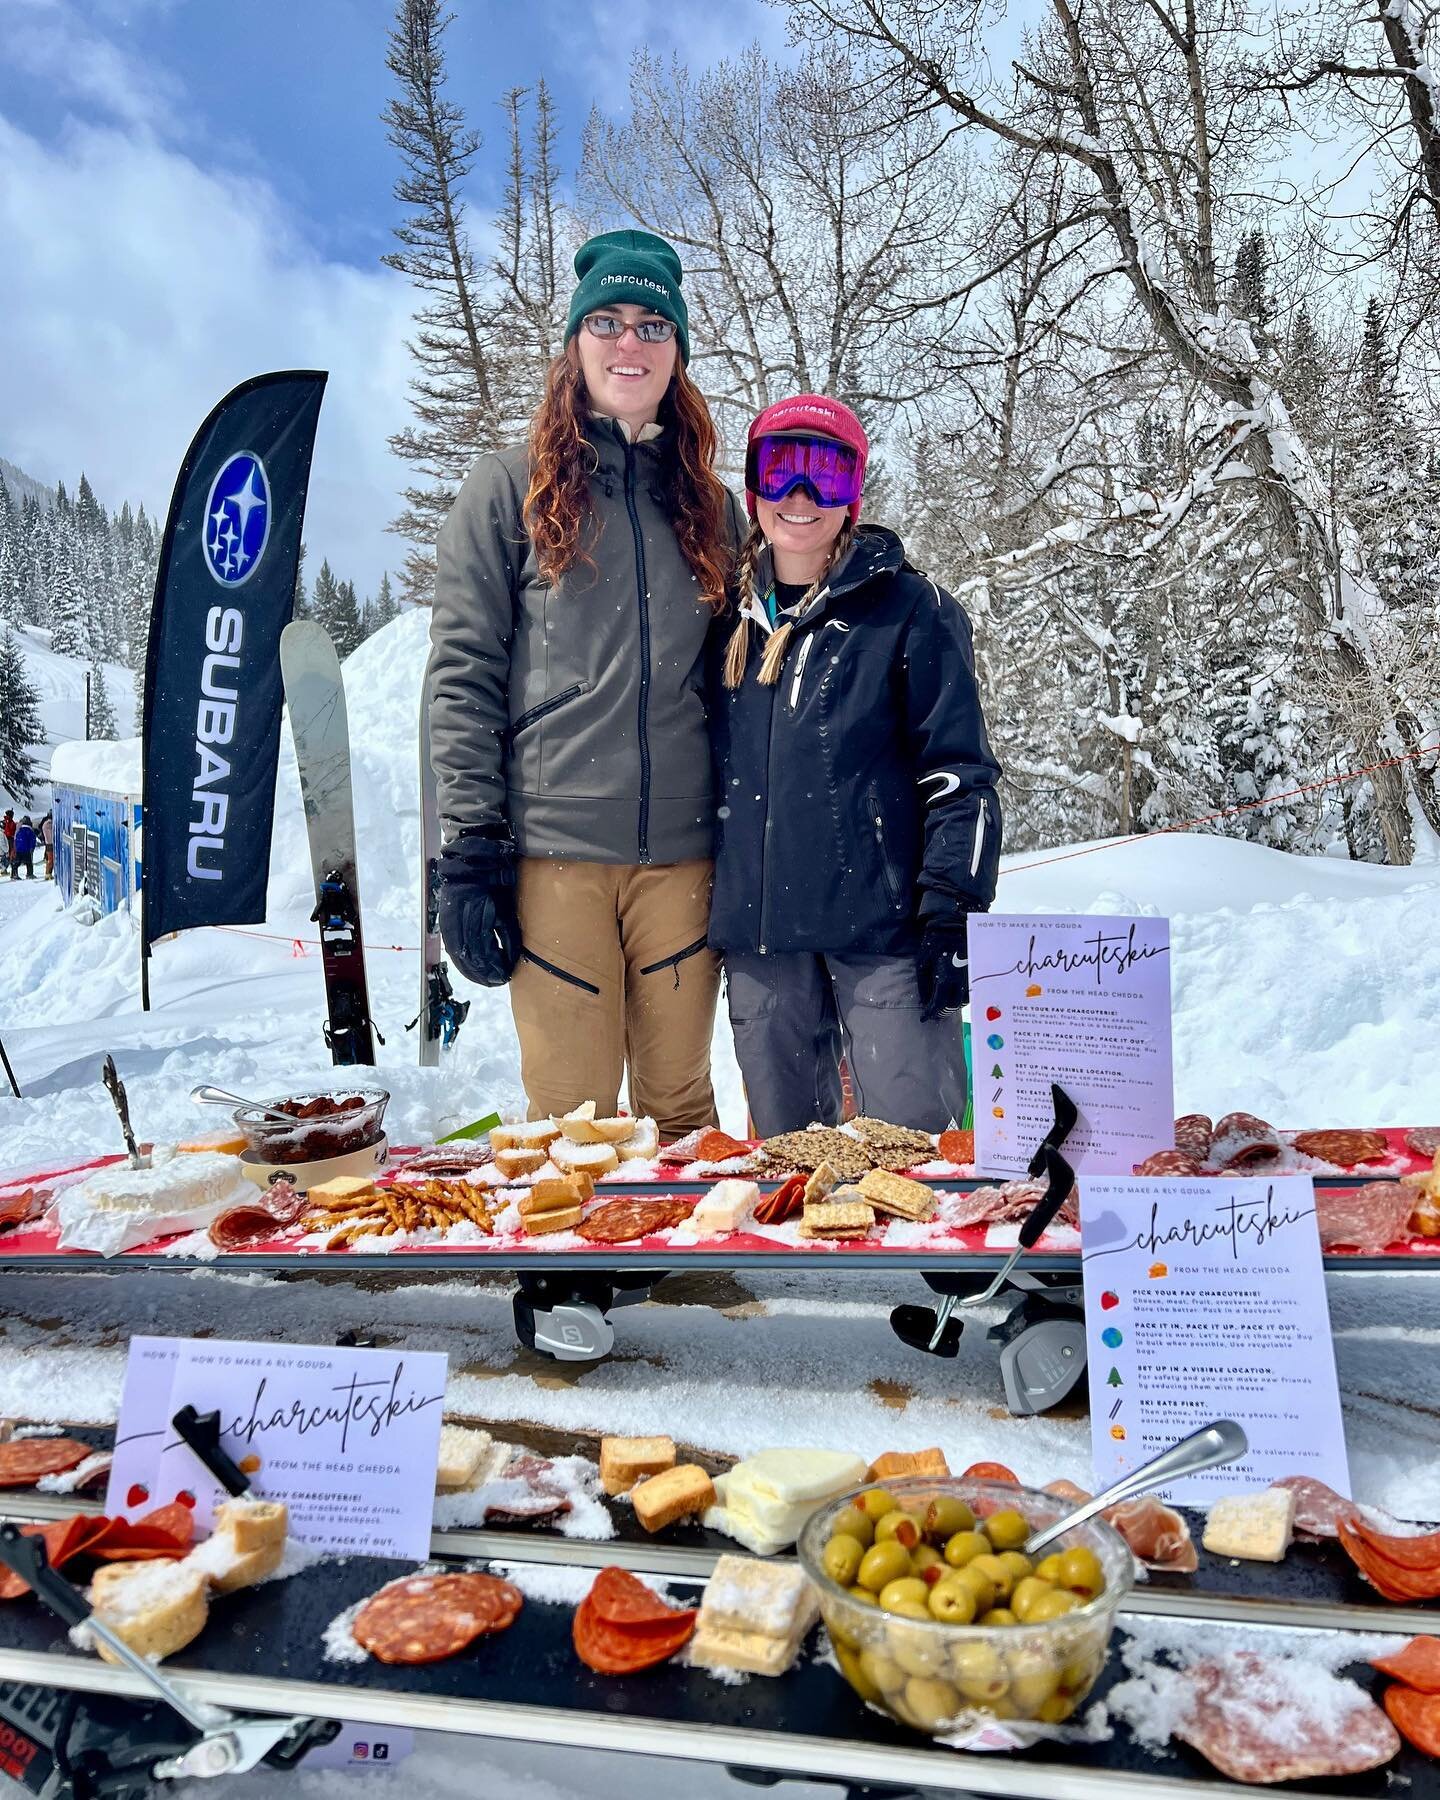 Still drooling in our dreams over Winterfest last weekend @snowbird 🤤 cheers to record seasons and cheese!
&bull;
Mozzarella, Cheddar, Asiago, Oaxaca, Gouda, Brie, Pepper Jack, Dill Havarti, Colby Jack, crostini, Triscuits, Ritz, LE PETITE TOAST, @t